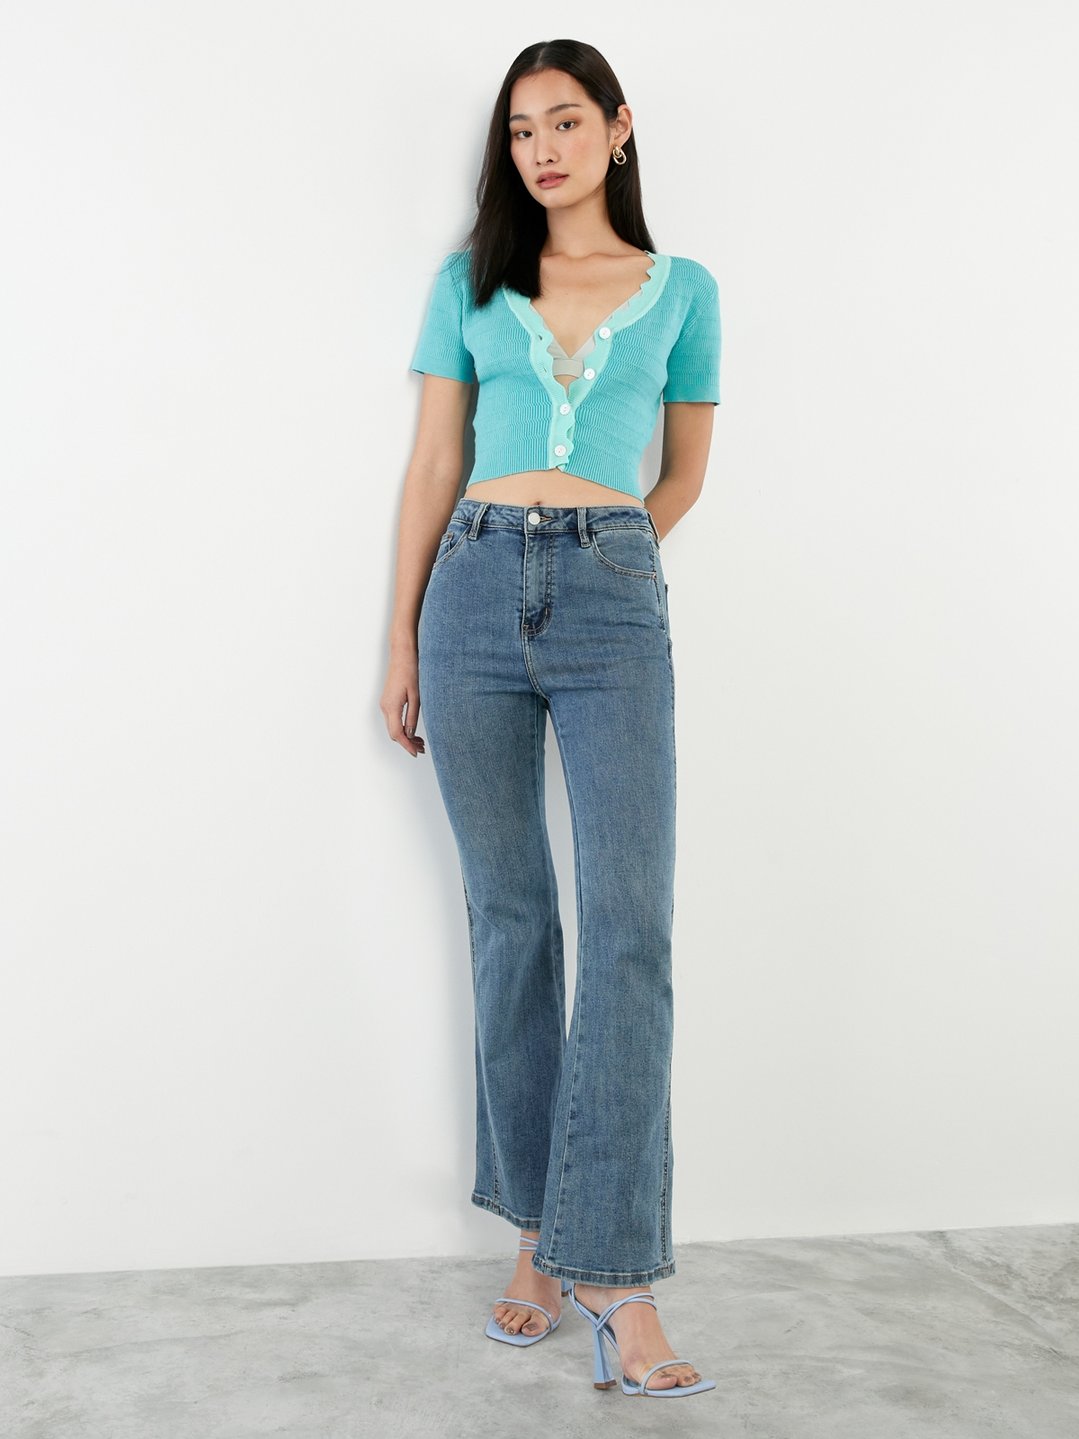 Butterfly Sleeves Twisted Crop Top Navy Pomelo Fashion, 40% OFF